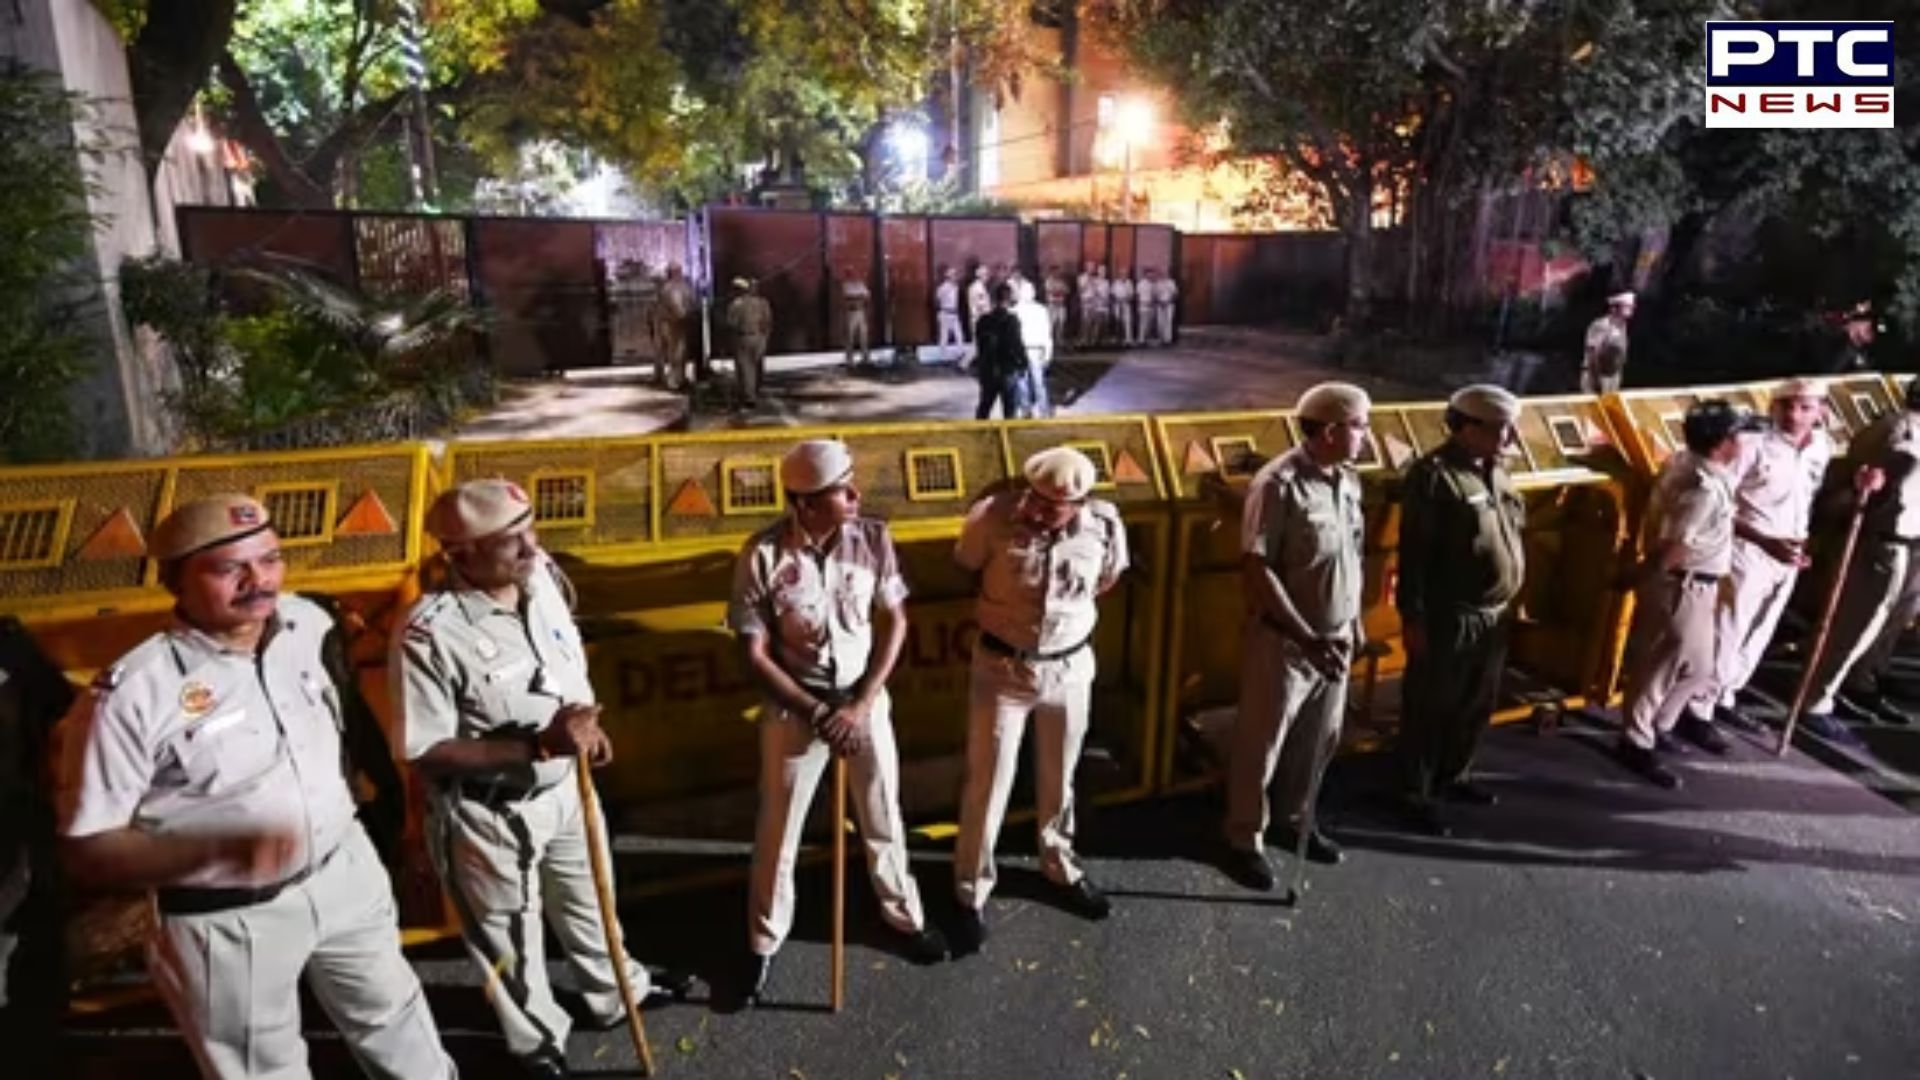 AAP plans to 'gherao' PM Modi's residence, Delhi police denies permission: Latest Updates